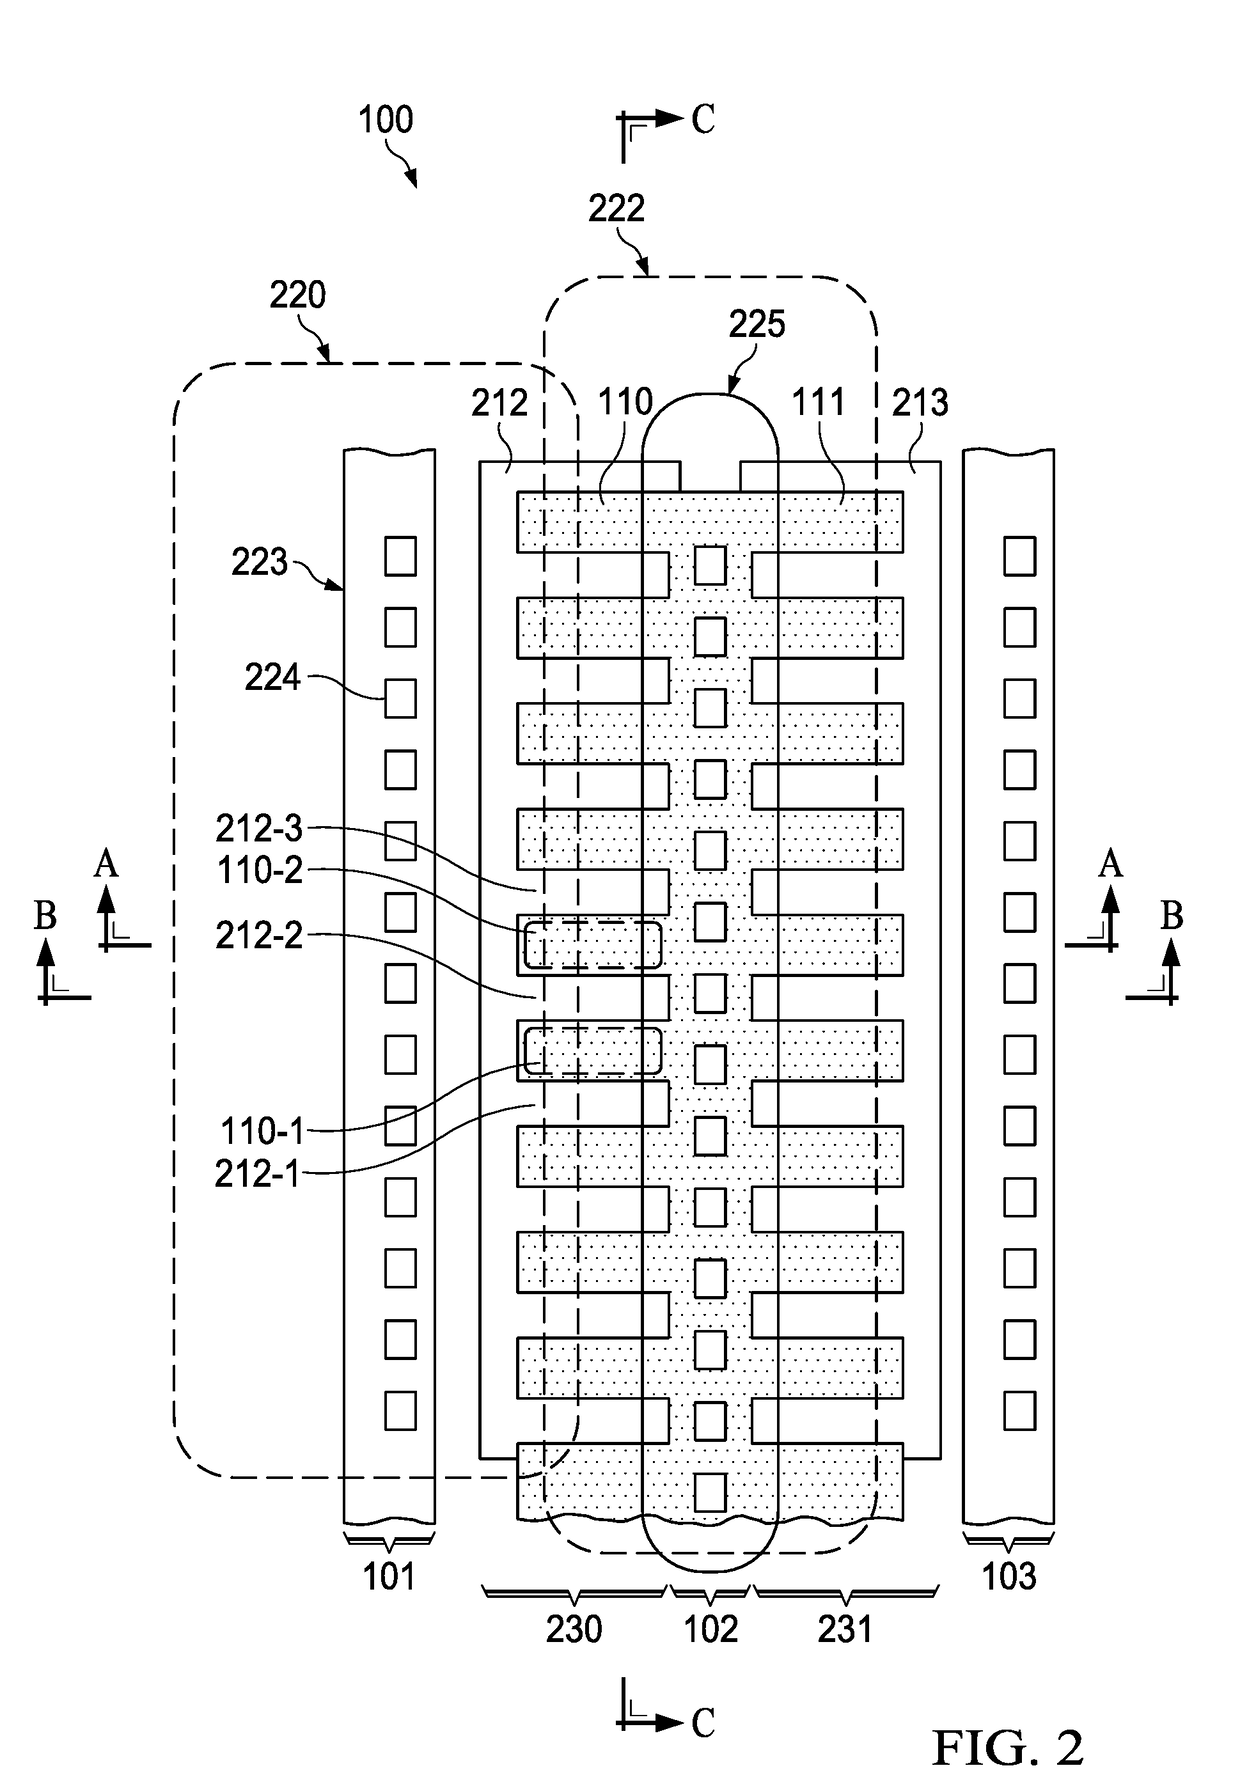 LDMOS Transistor with Segmented Gate Dielectric Layer